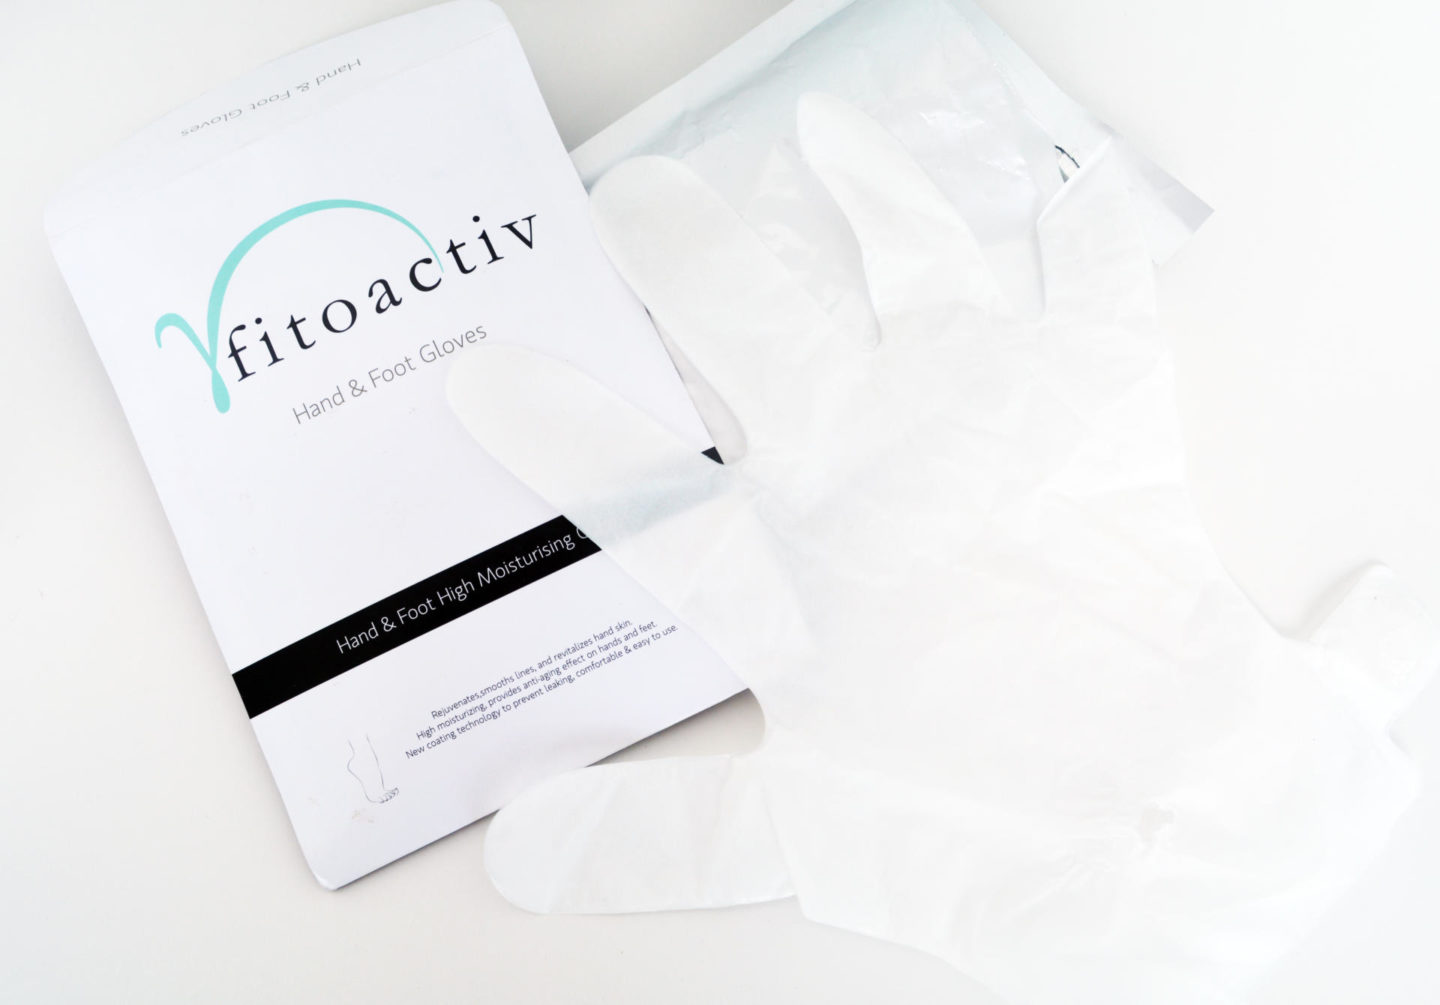 fitoactiv hydrating gloves 